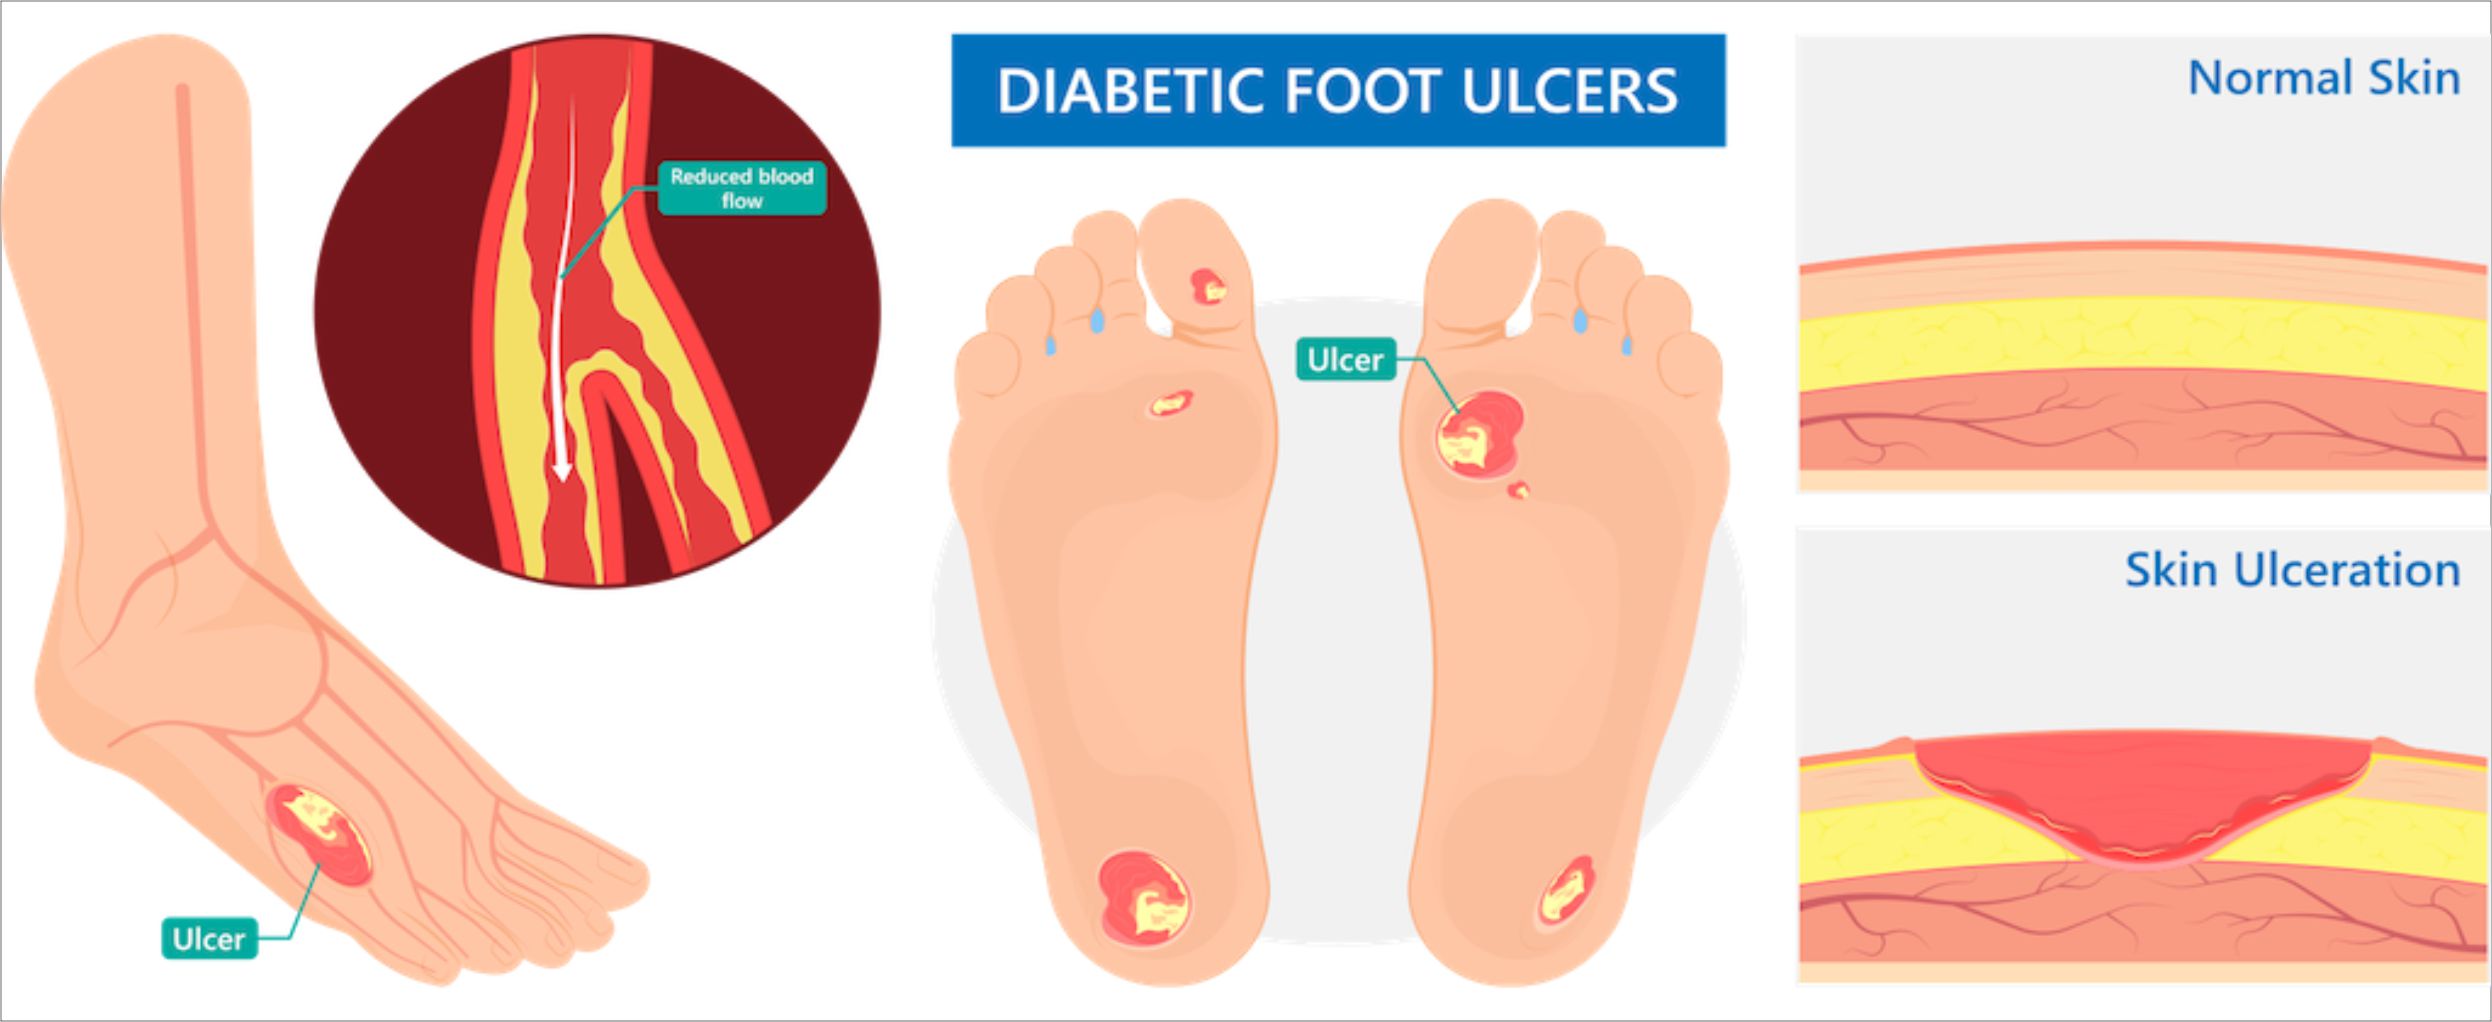 HBOT Treatment for Diabetic Foot Ulcers